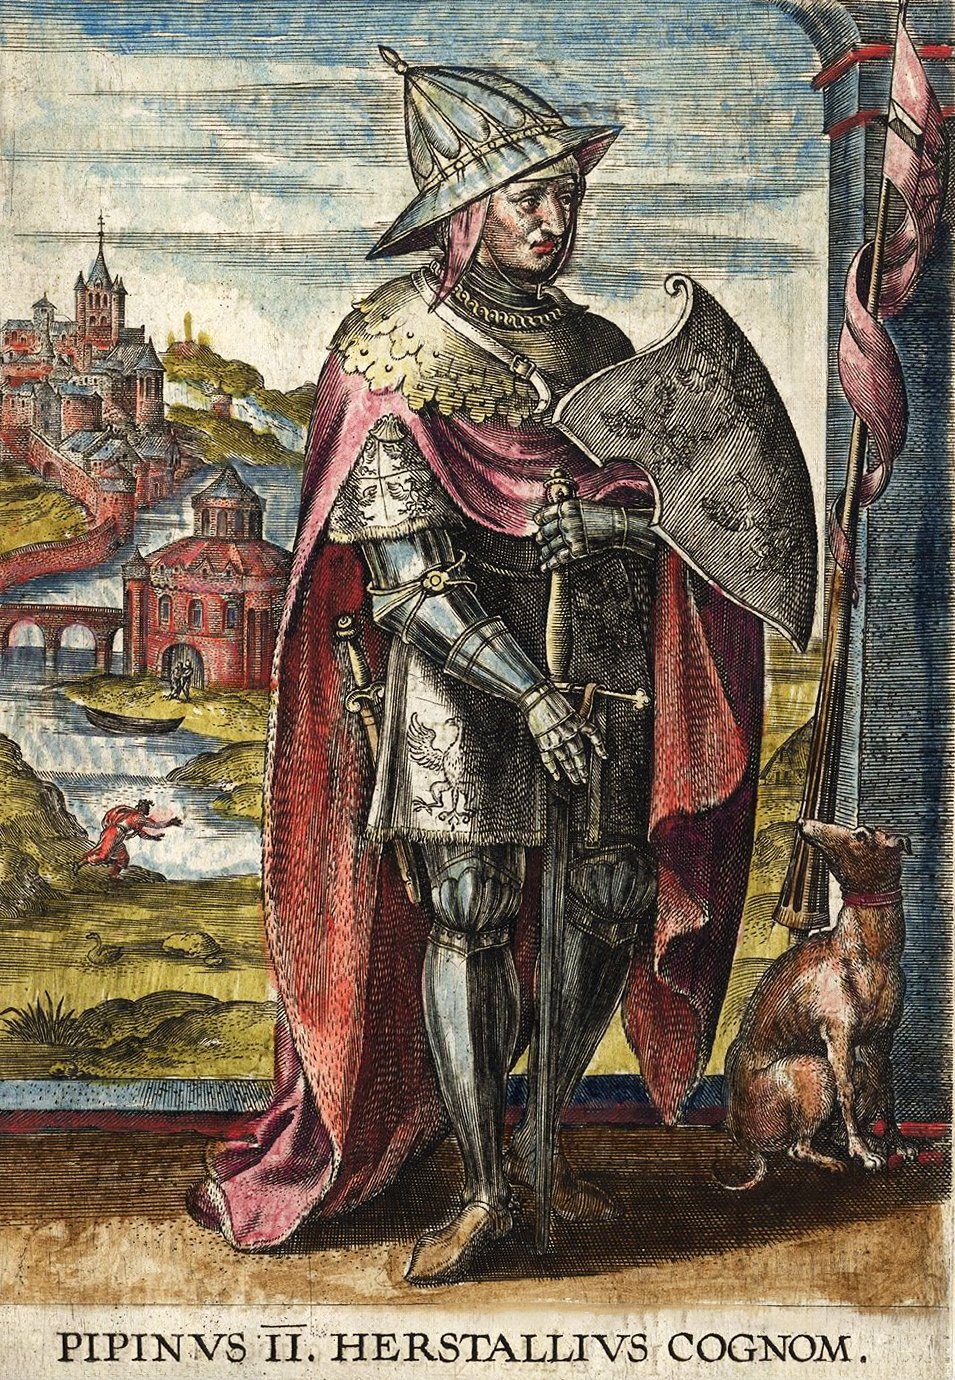 An illustration of Pepin of Herstal dressed as knight in armor with a shield and sword, standing on a hill with a castle and a river in the background. The image has text that reads “Pipinus II. Herstallius Cognom.”